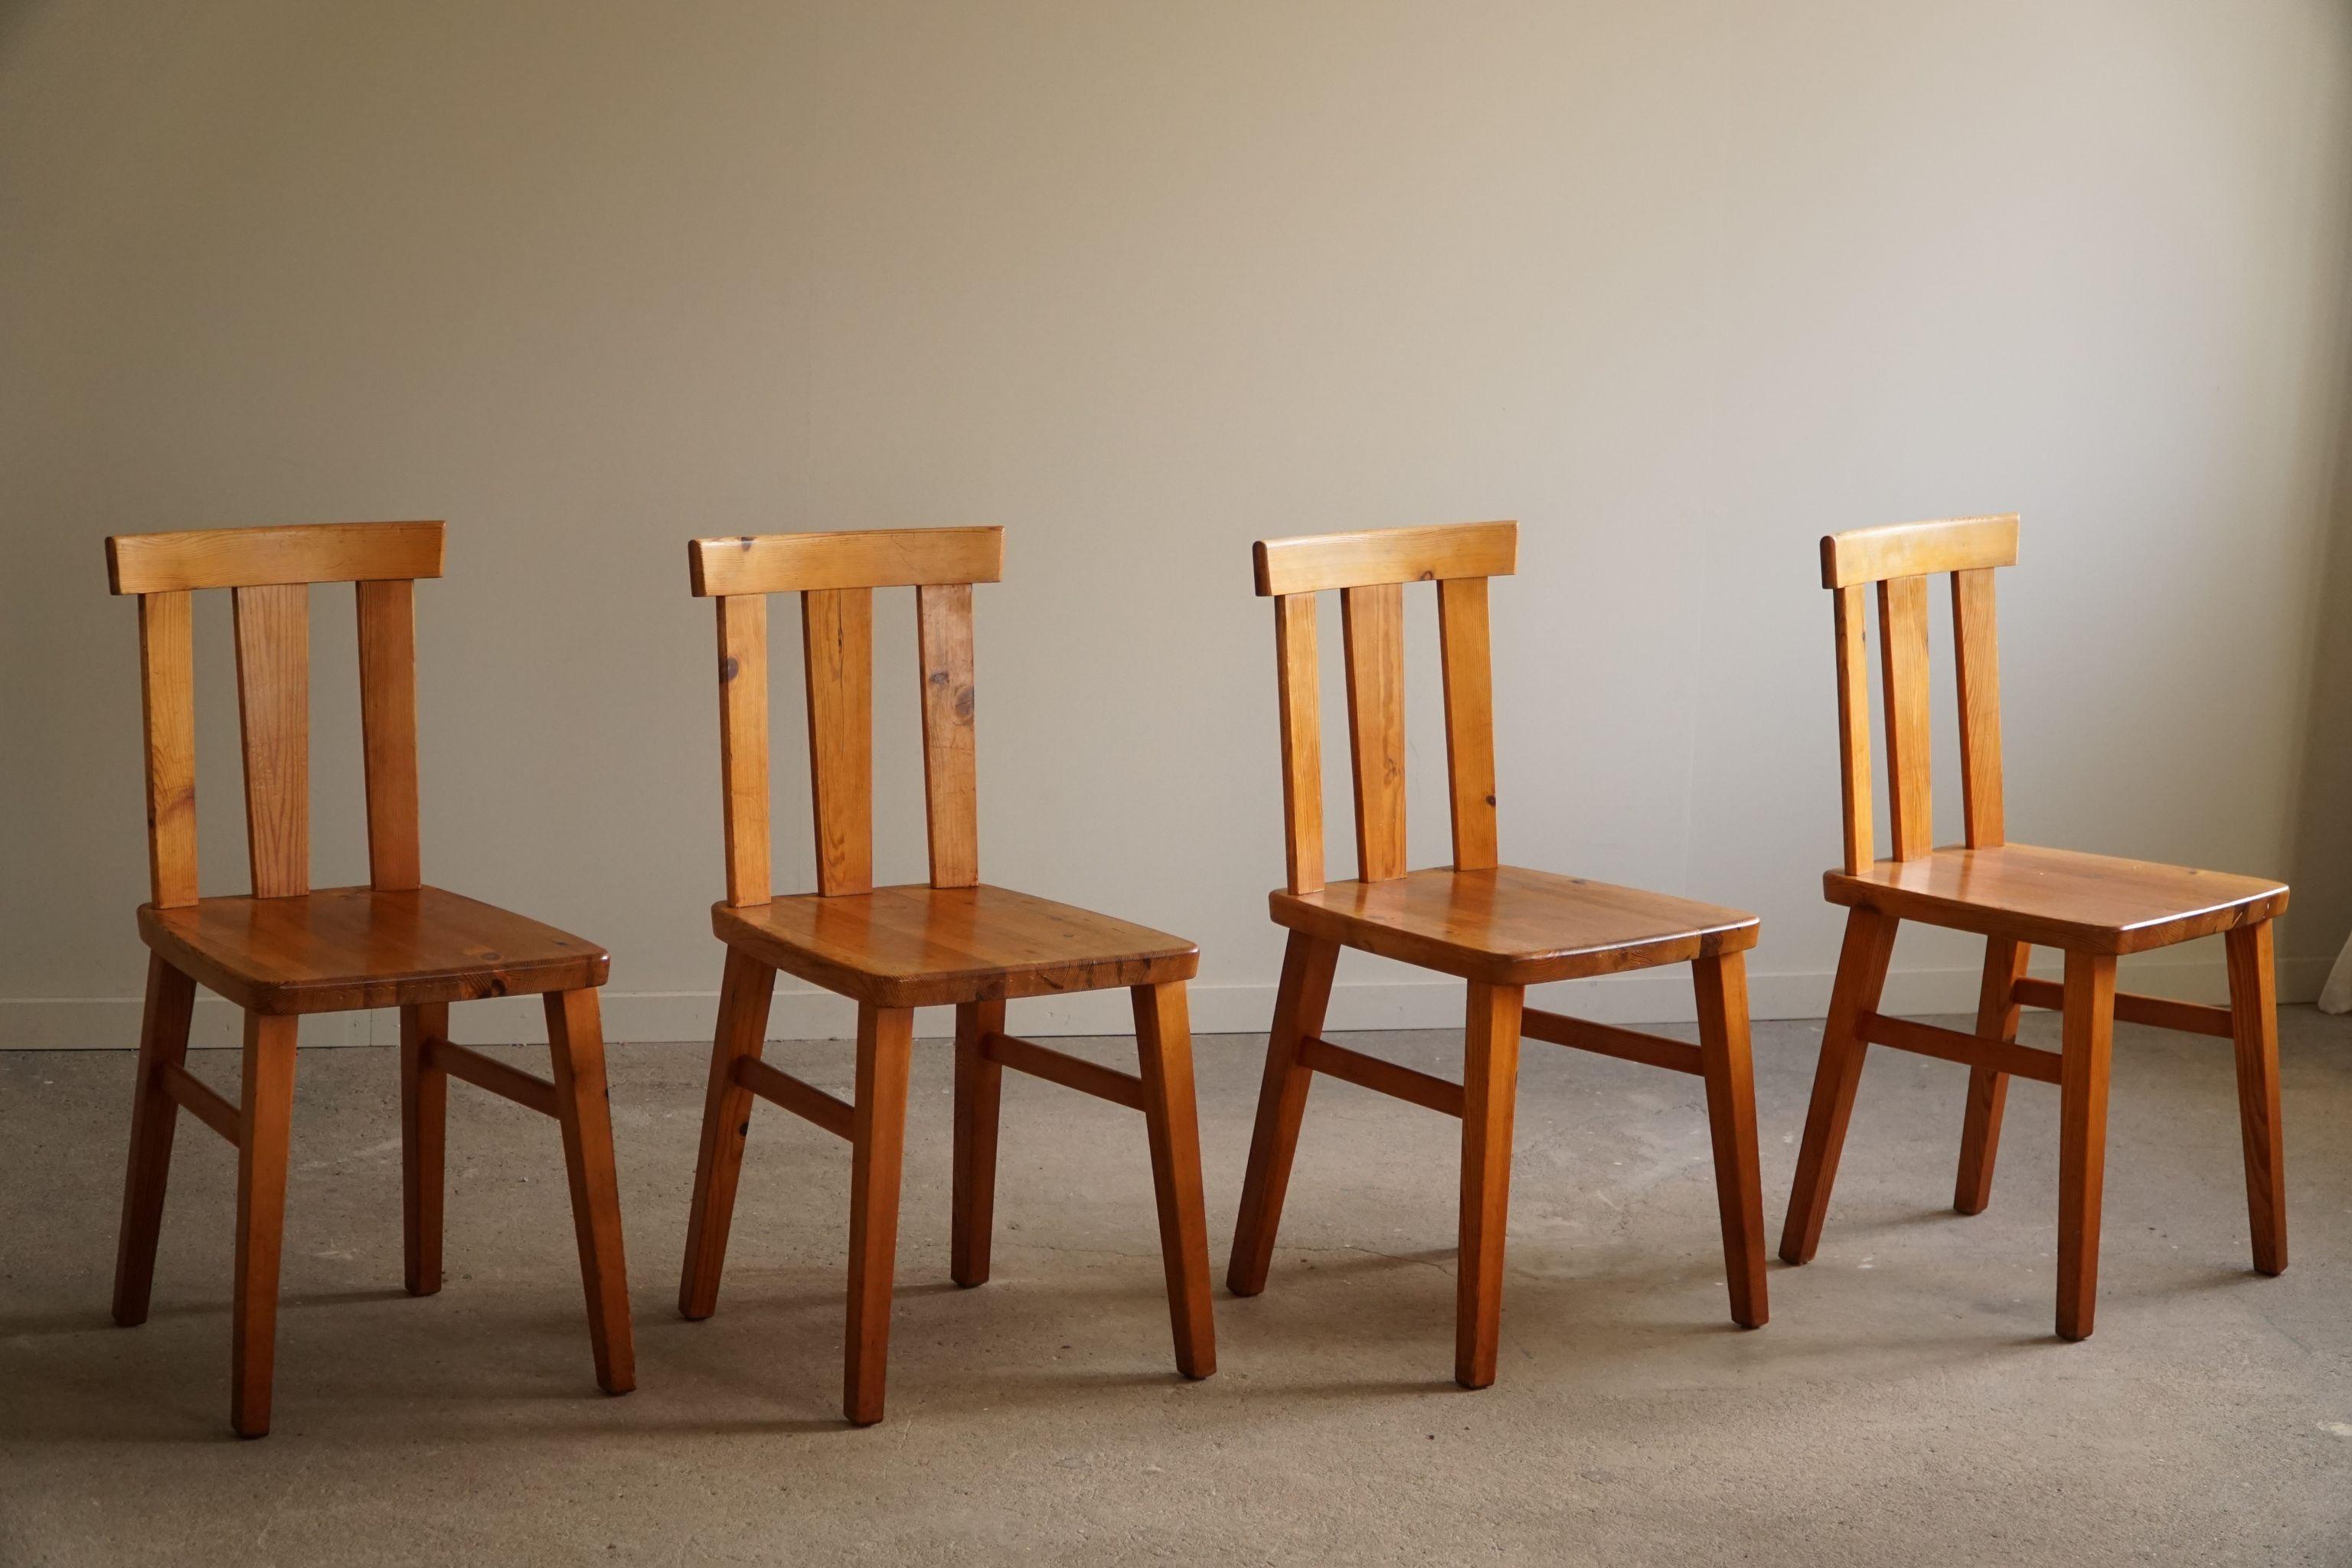 Swedish Modern, Set of 4 Chairs in Solid Pine, Axel Einar Hjorth Style, 1950s For Sale 12